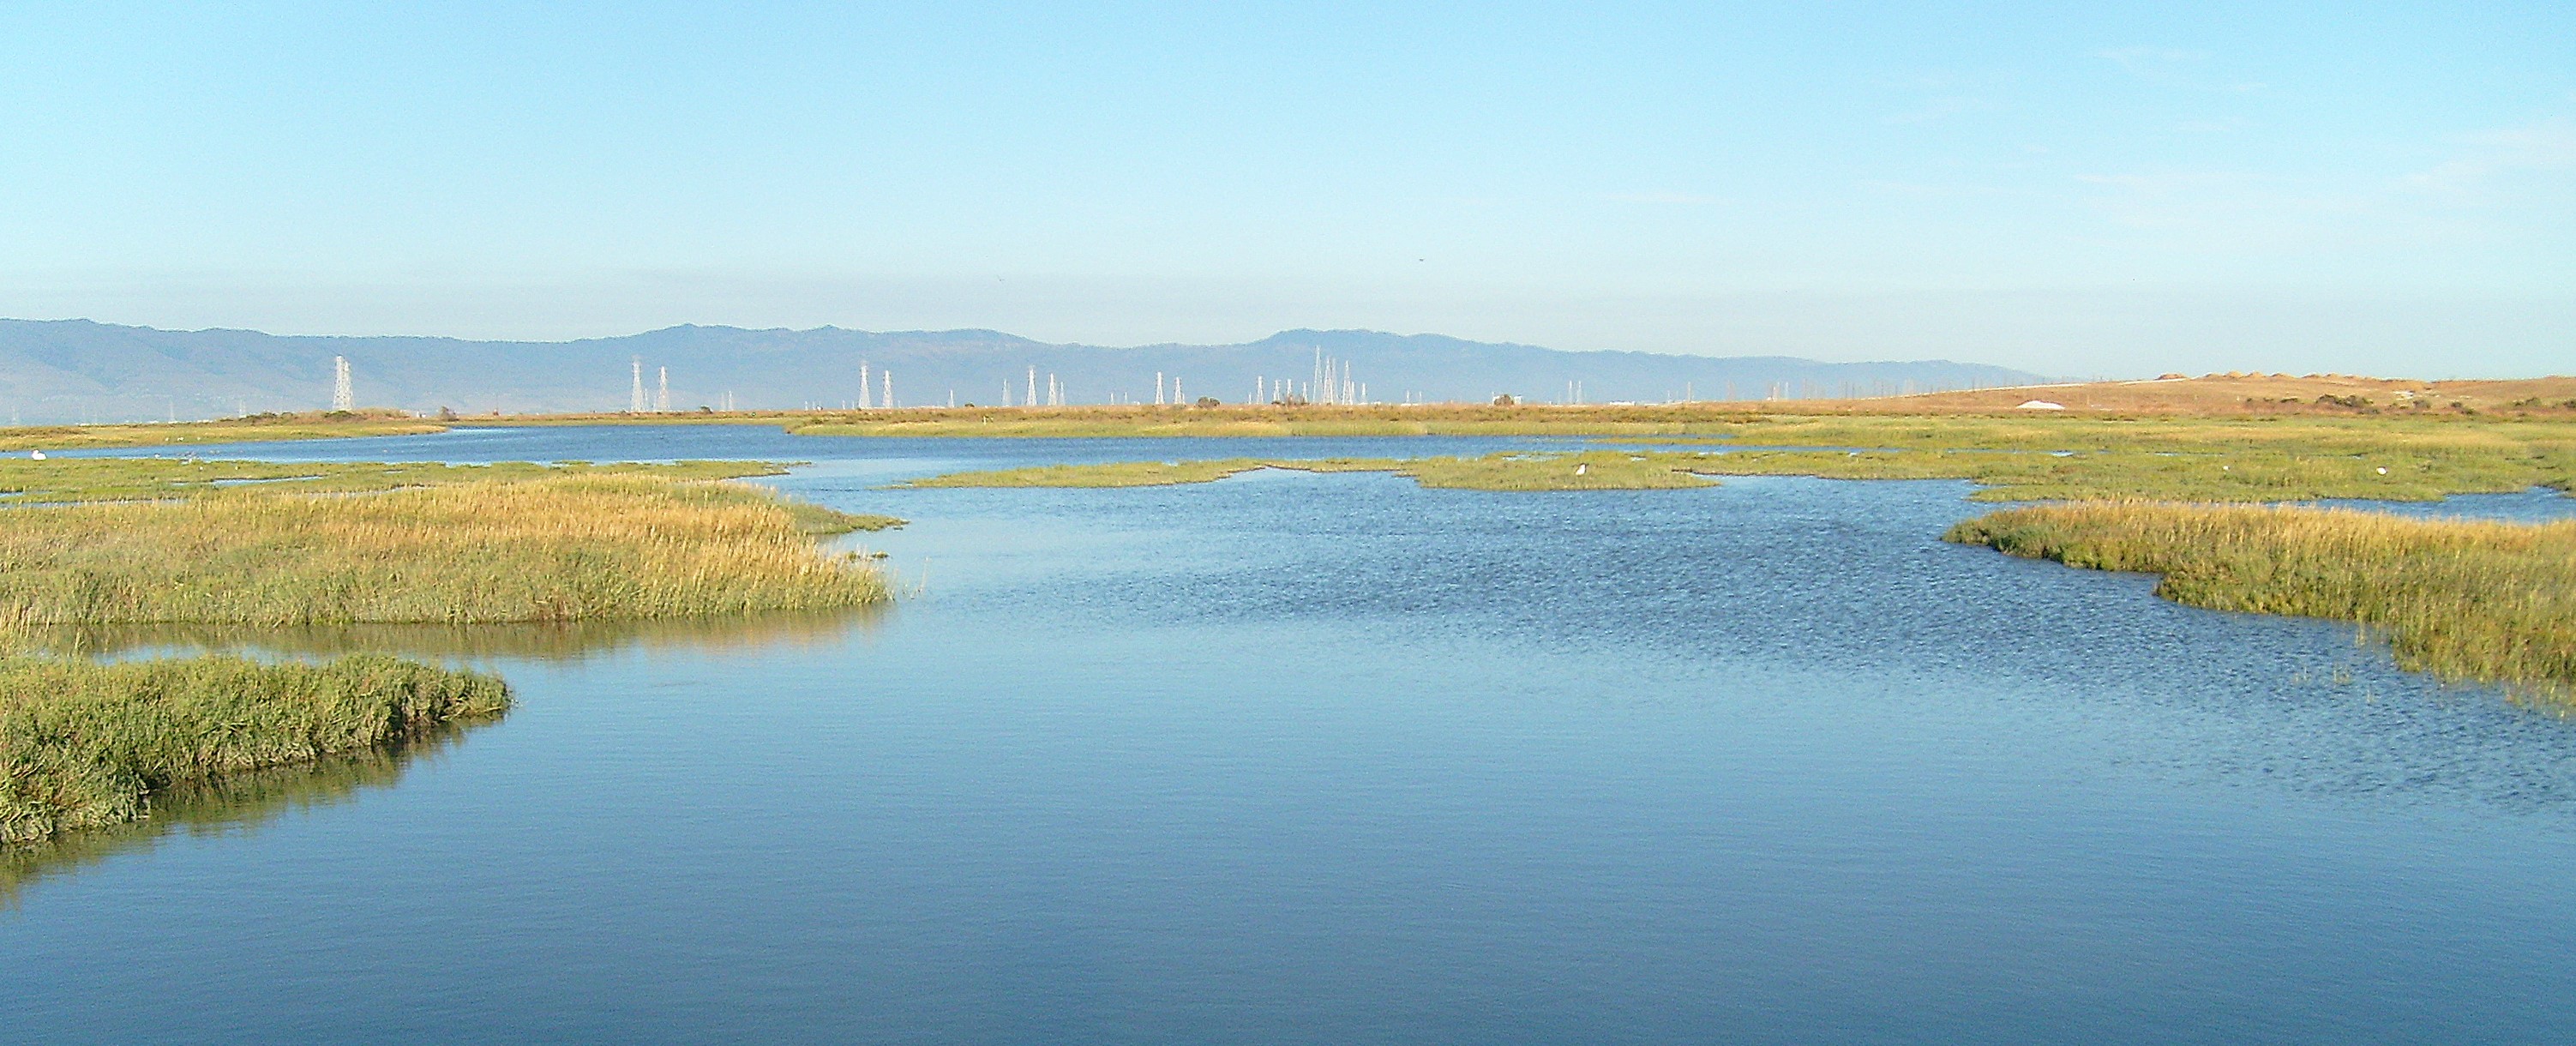 A wideshot of the marshlands connected to the SF Bay near Palo Alto, CA